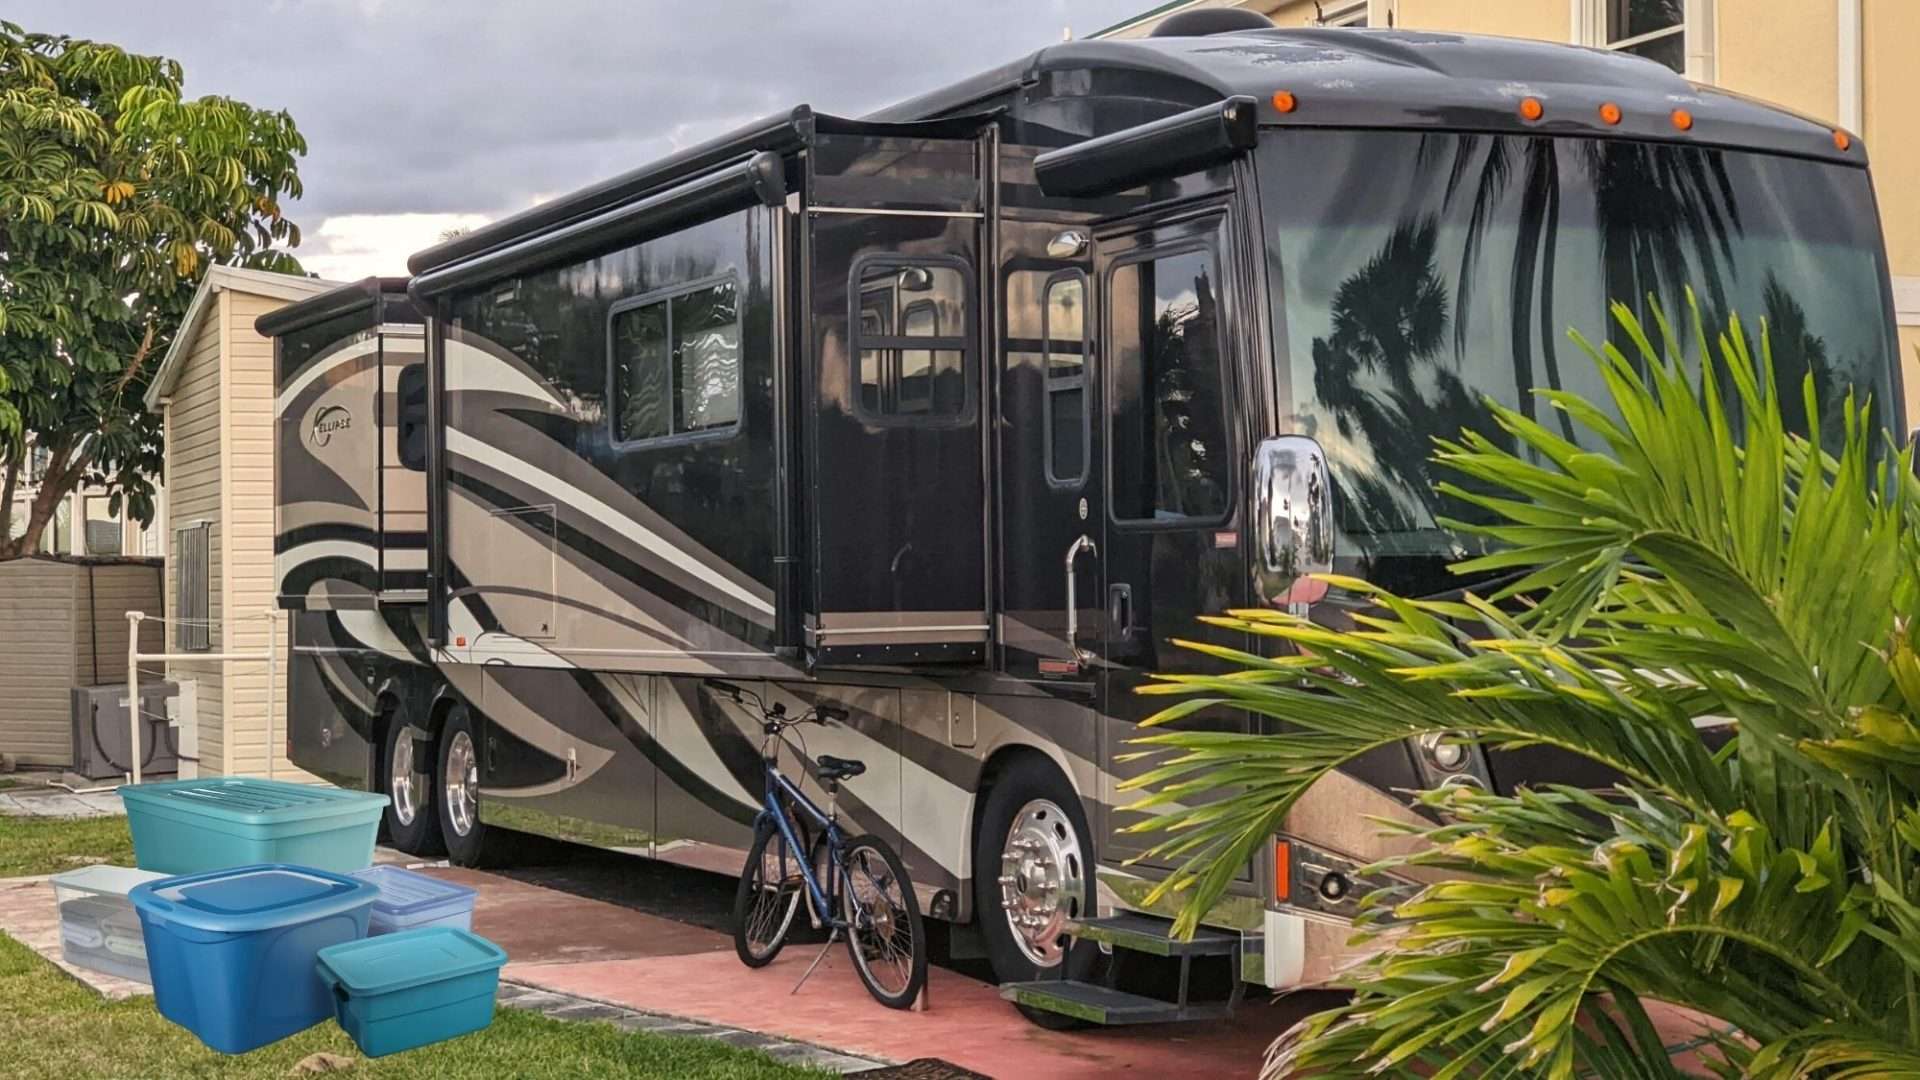 Class A RV with storage bins outside